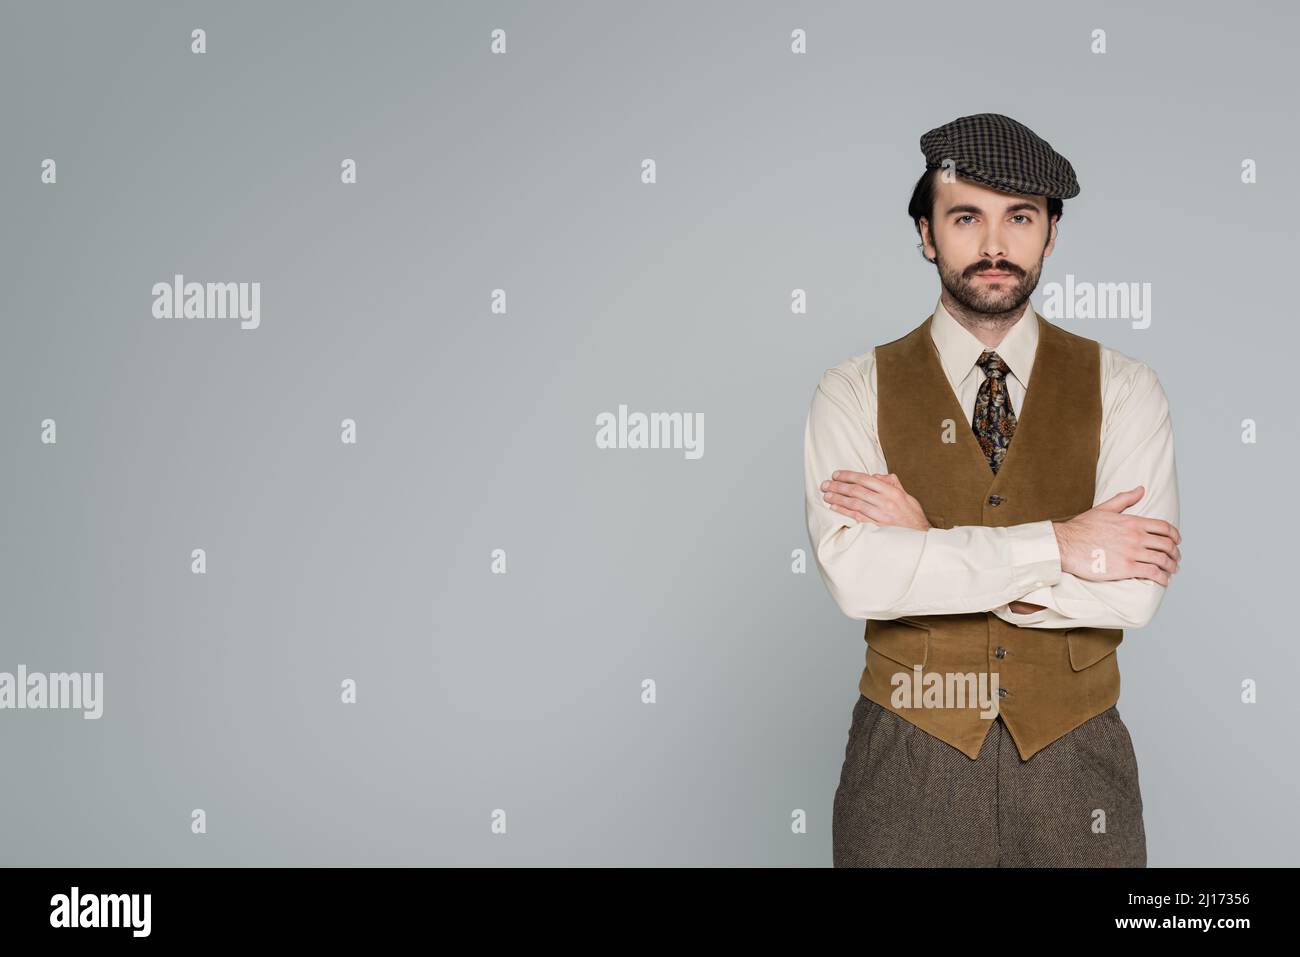 man with mustache and retro clothing standing with crossed arms ...